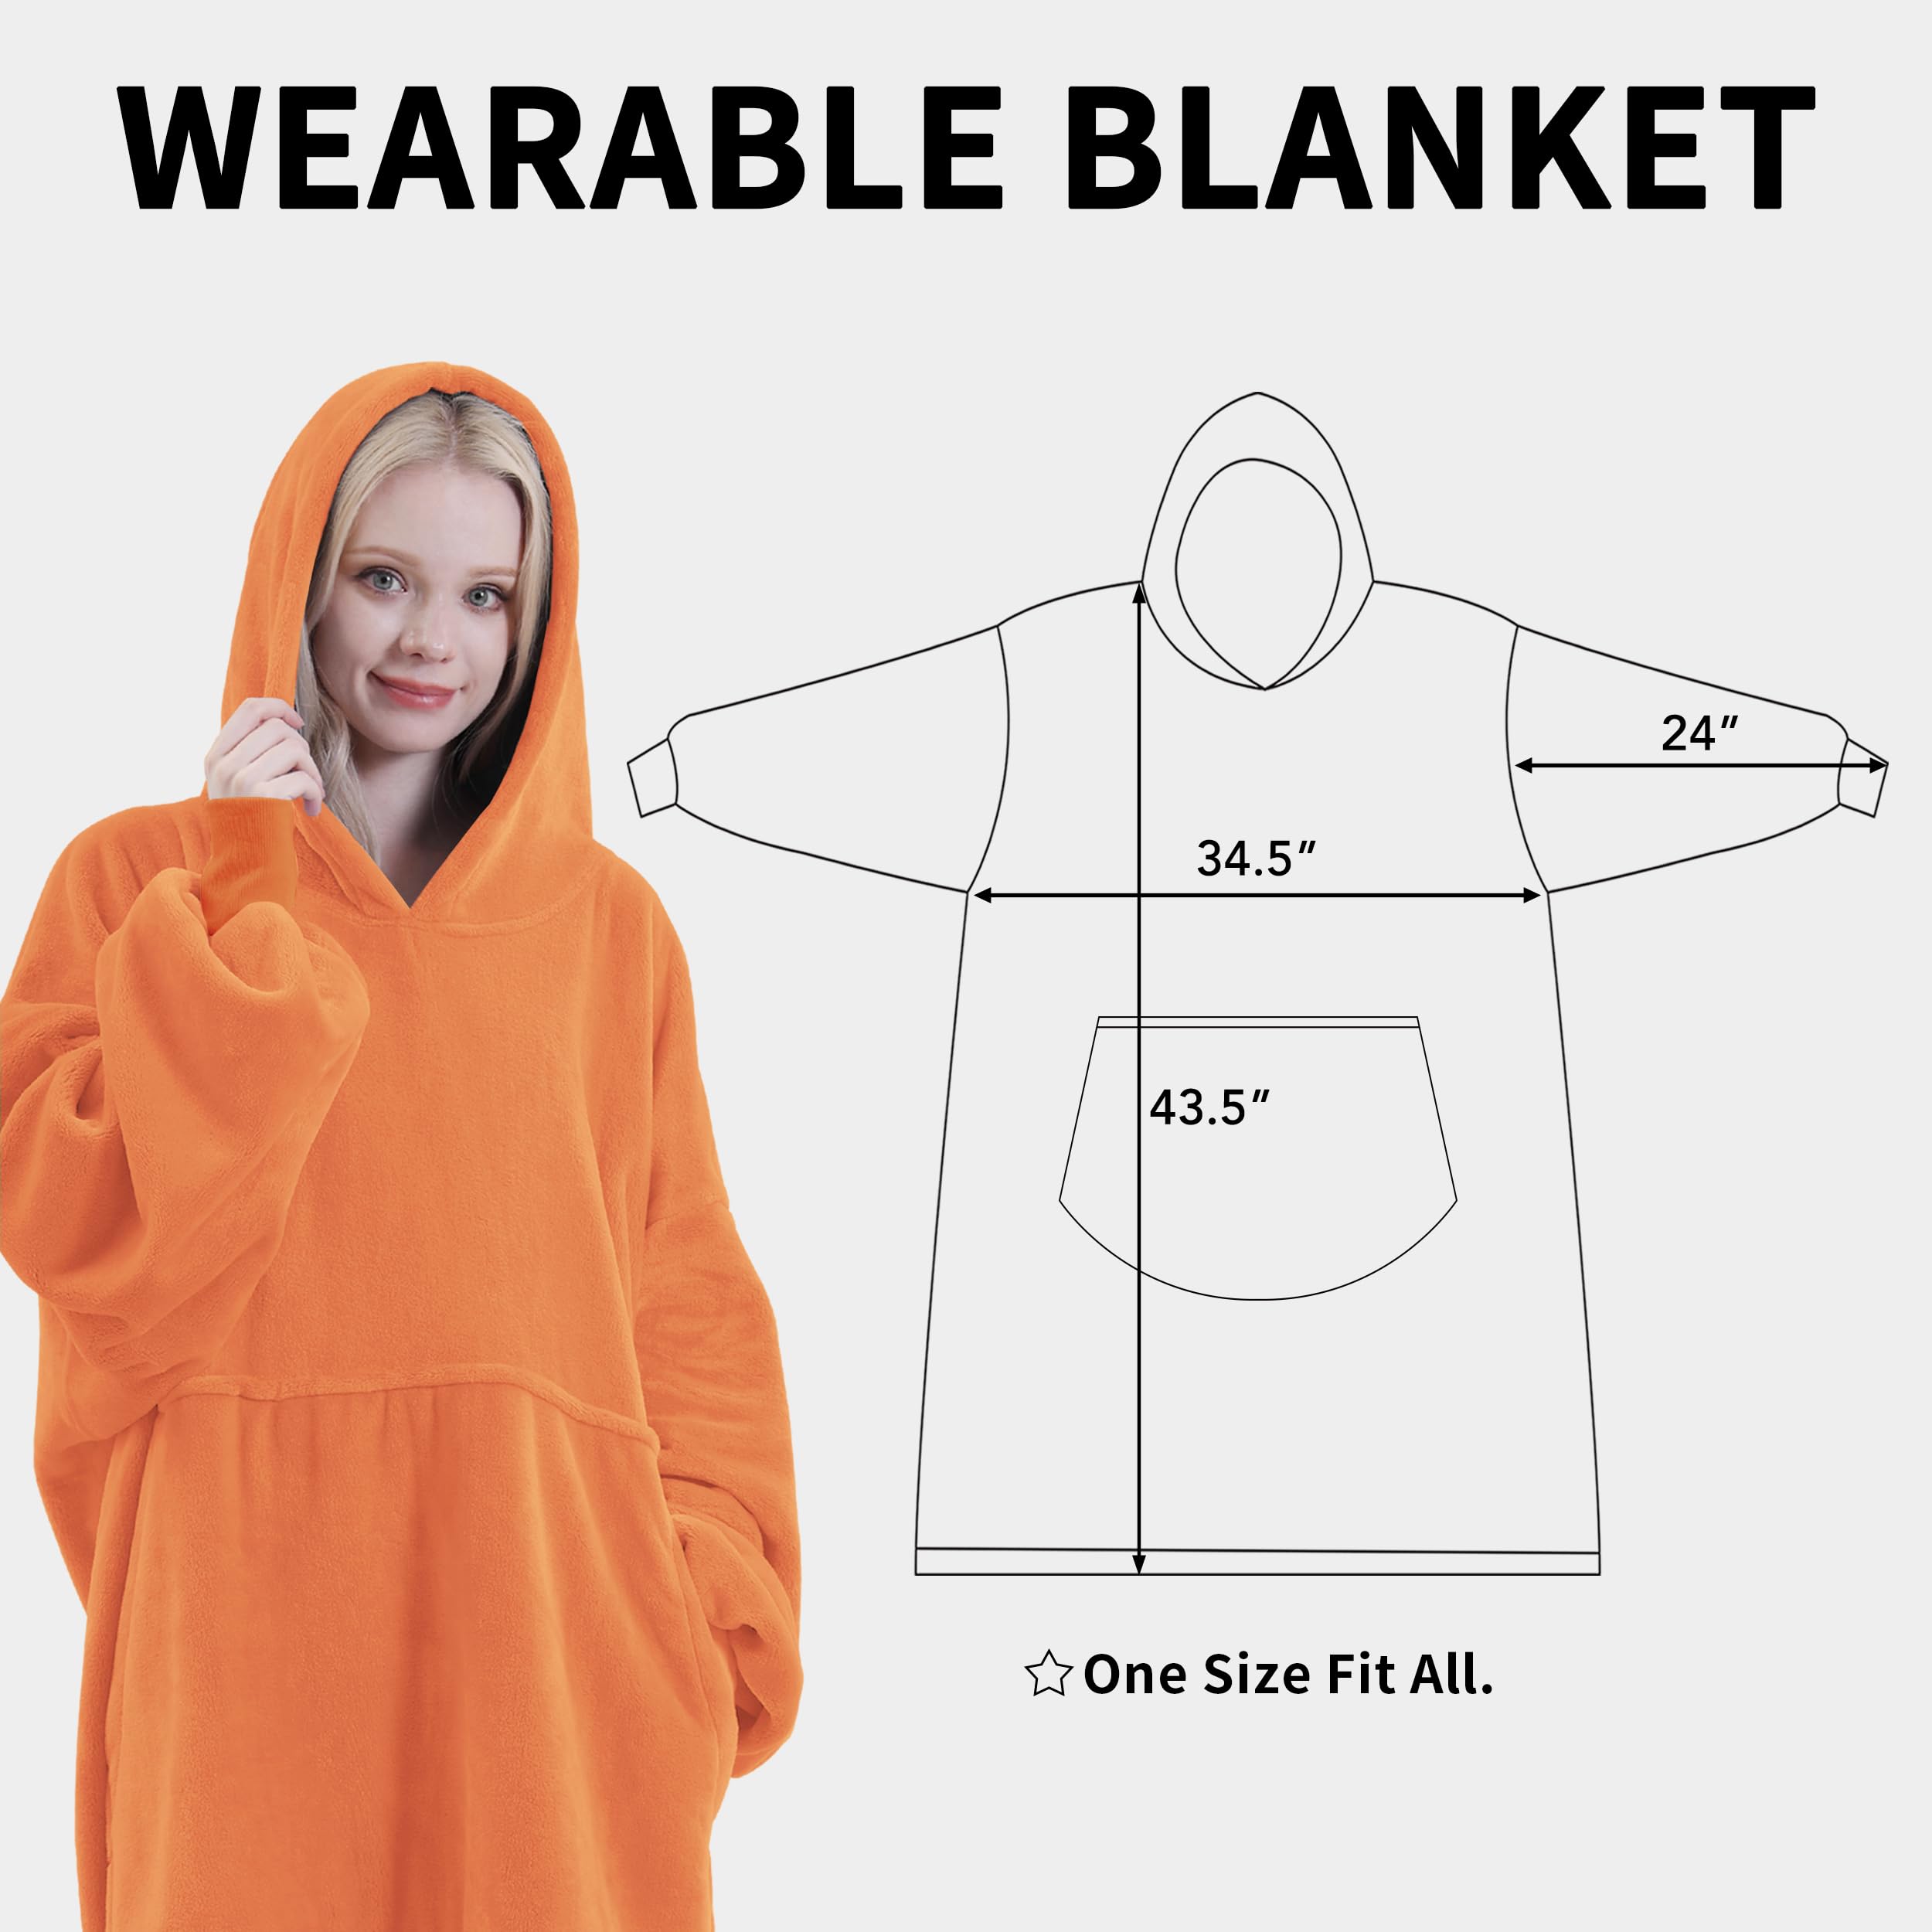 Easy-Going Oversized Flannel Wearable Blanket Hoodie for Adults, One Size Fits All, Orange